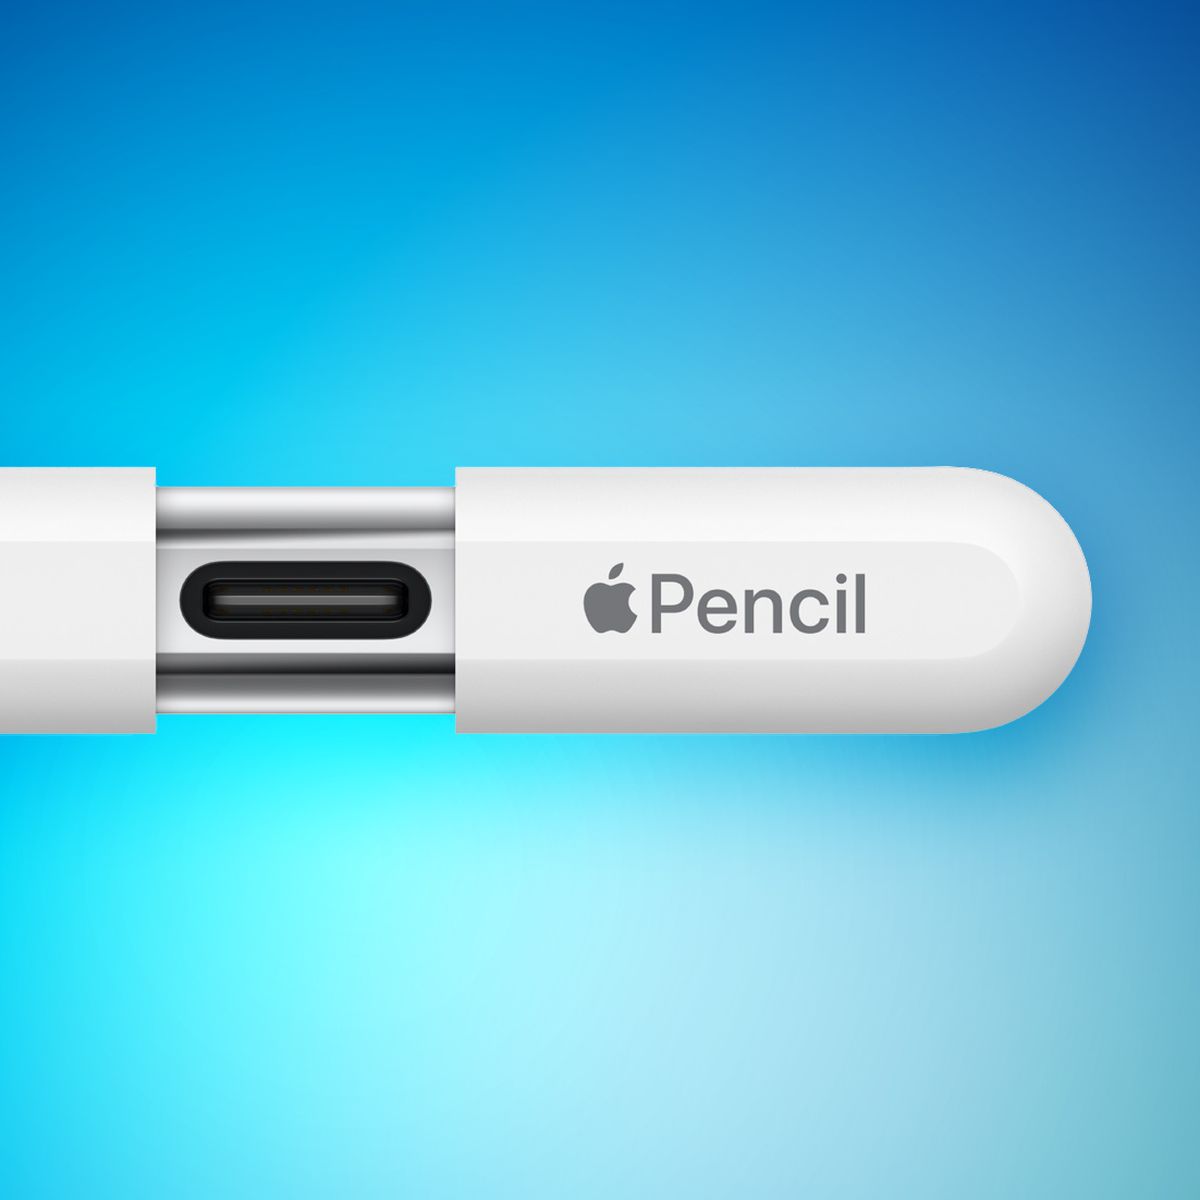 New USB-C Apple Pencil Now Available for Purchase - MacRumors